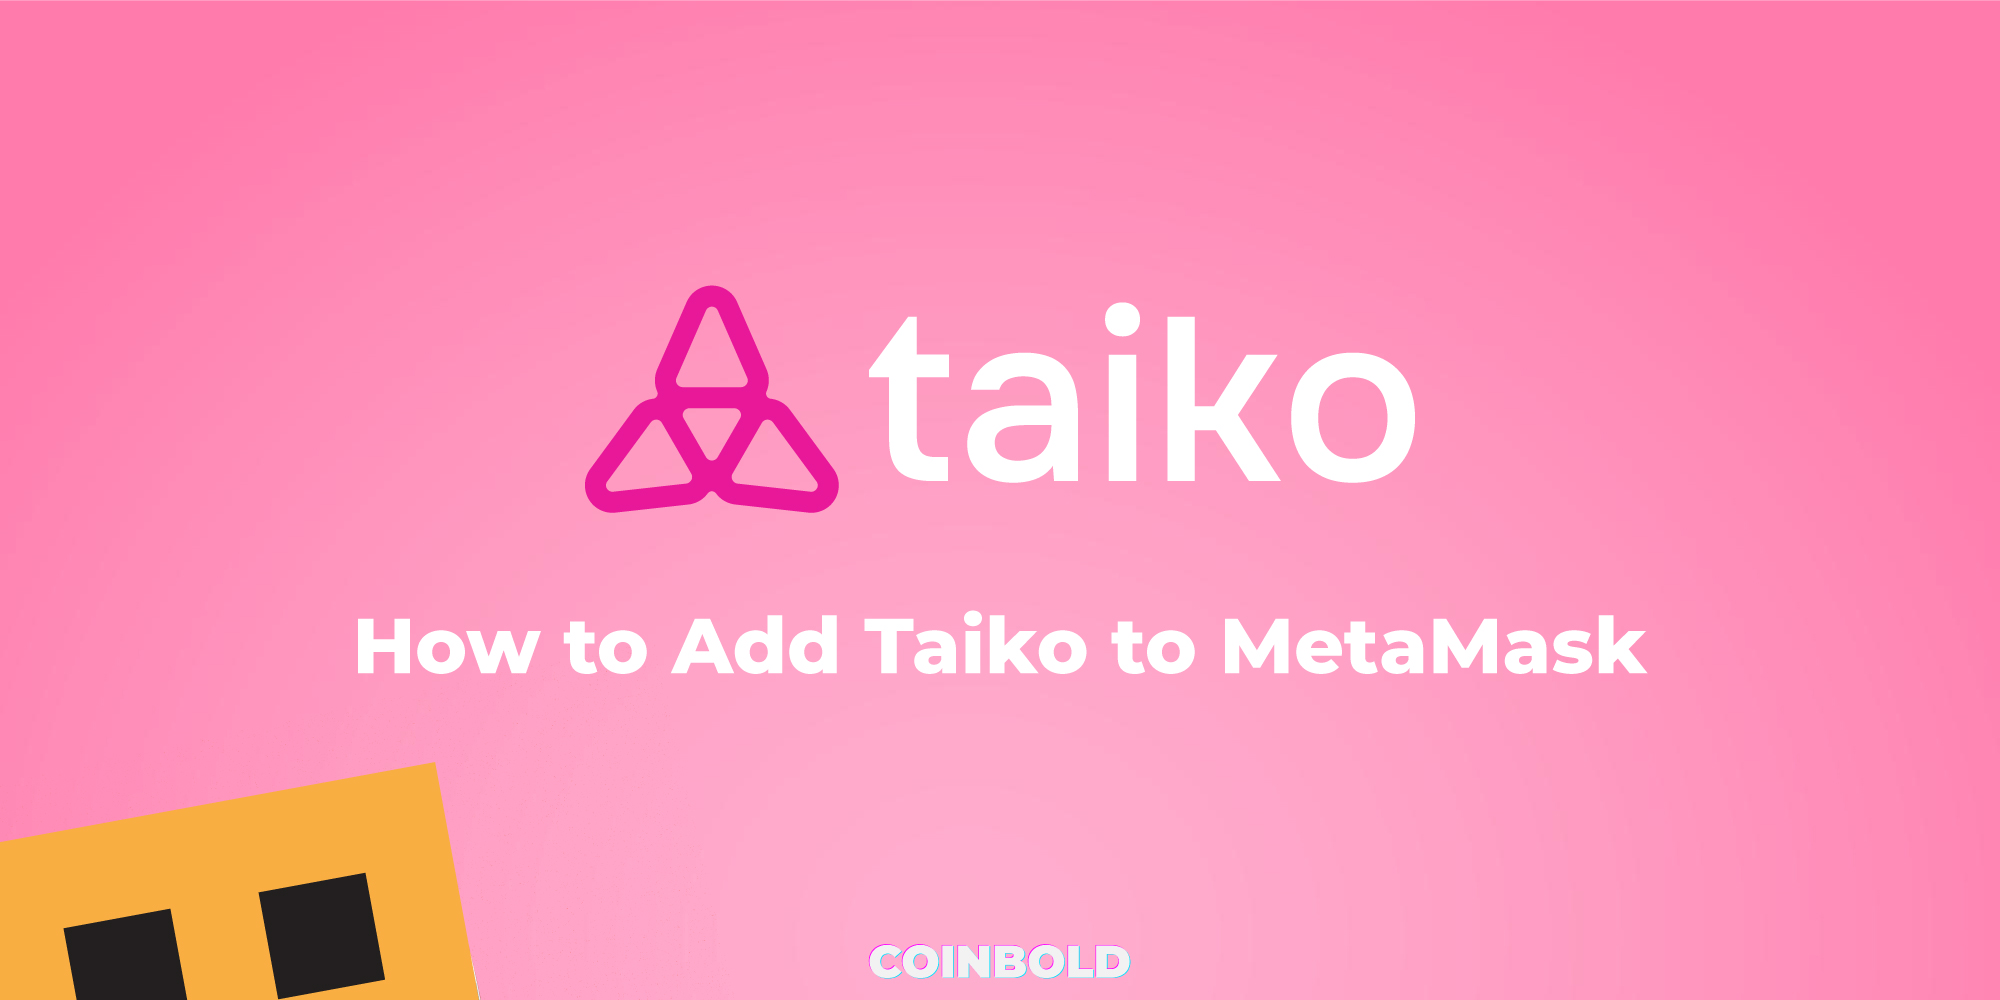 How to Add Taiko to MetaMask